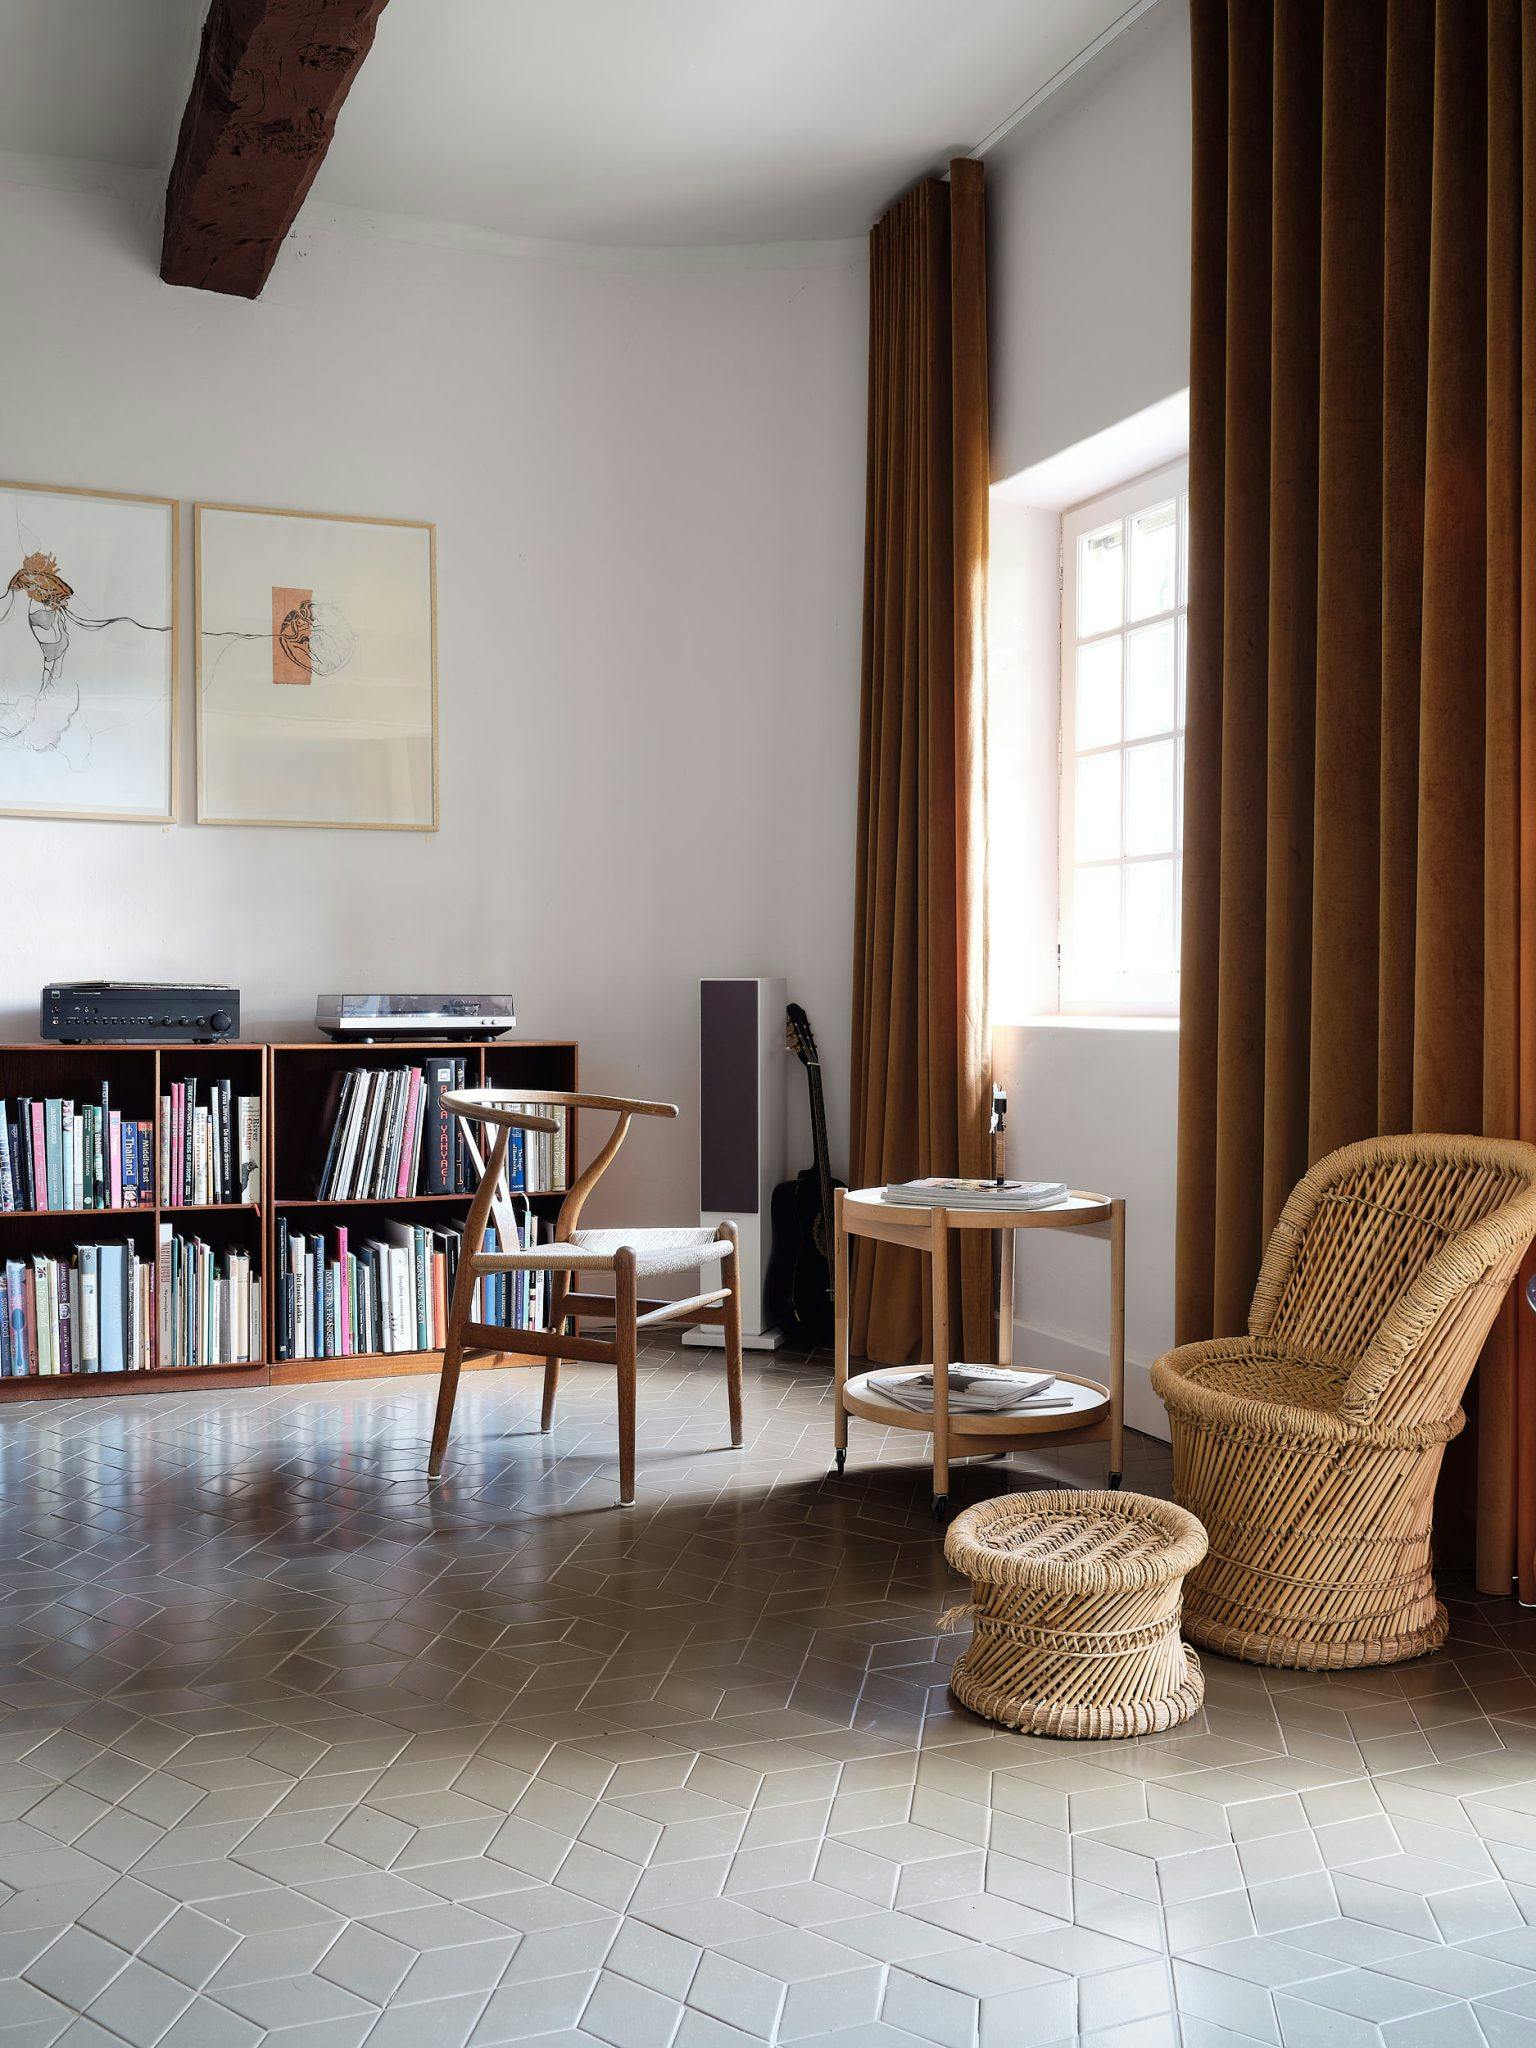 Library and reading area with straw furniture